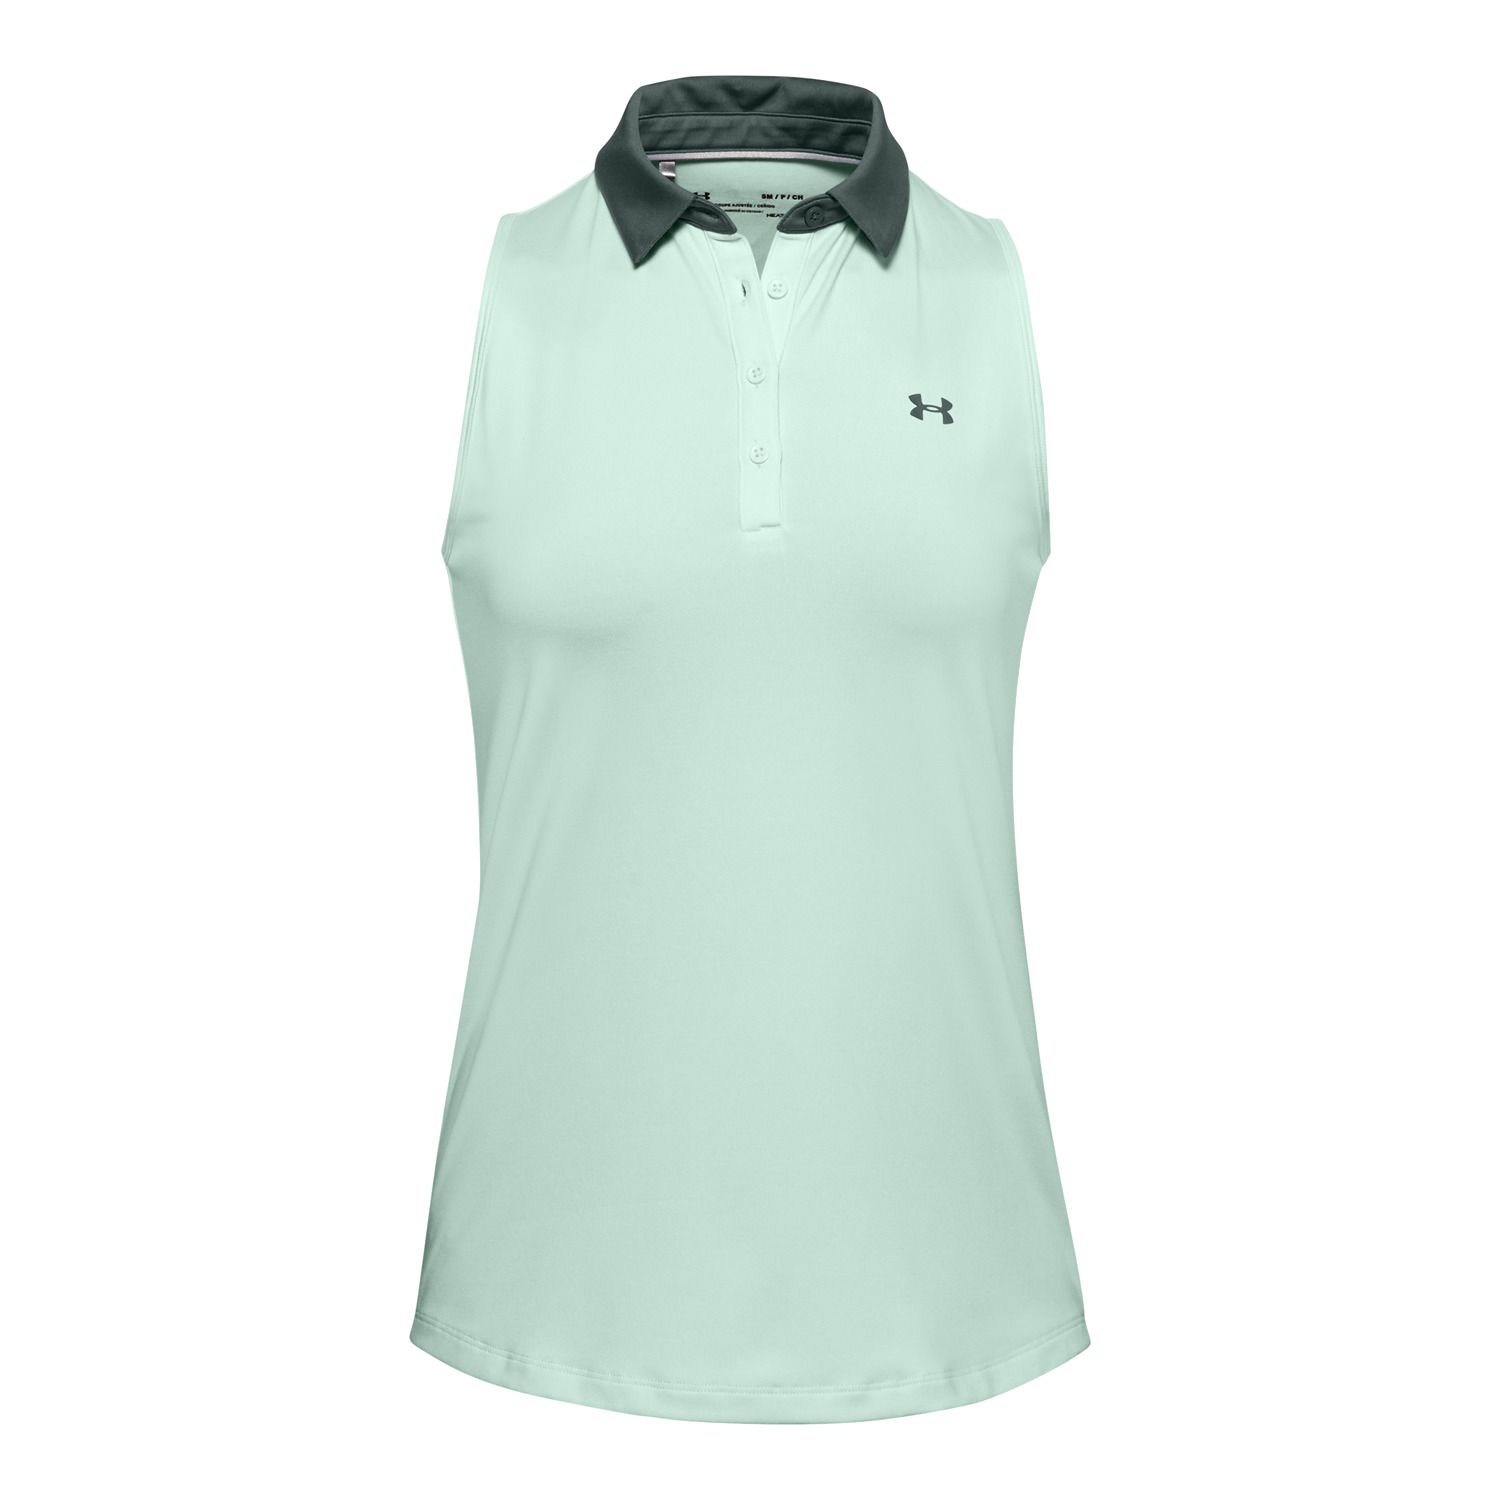 kohl's under armour golf shirts